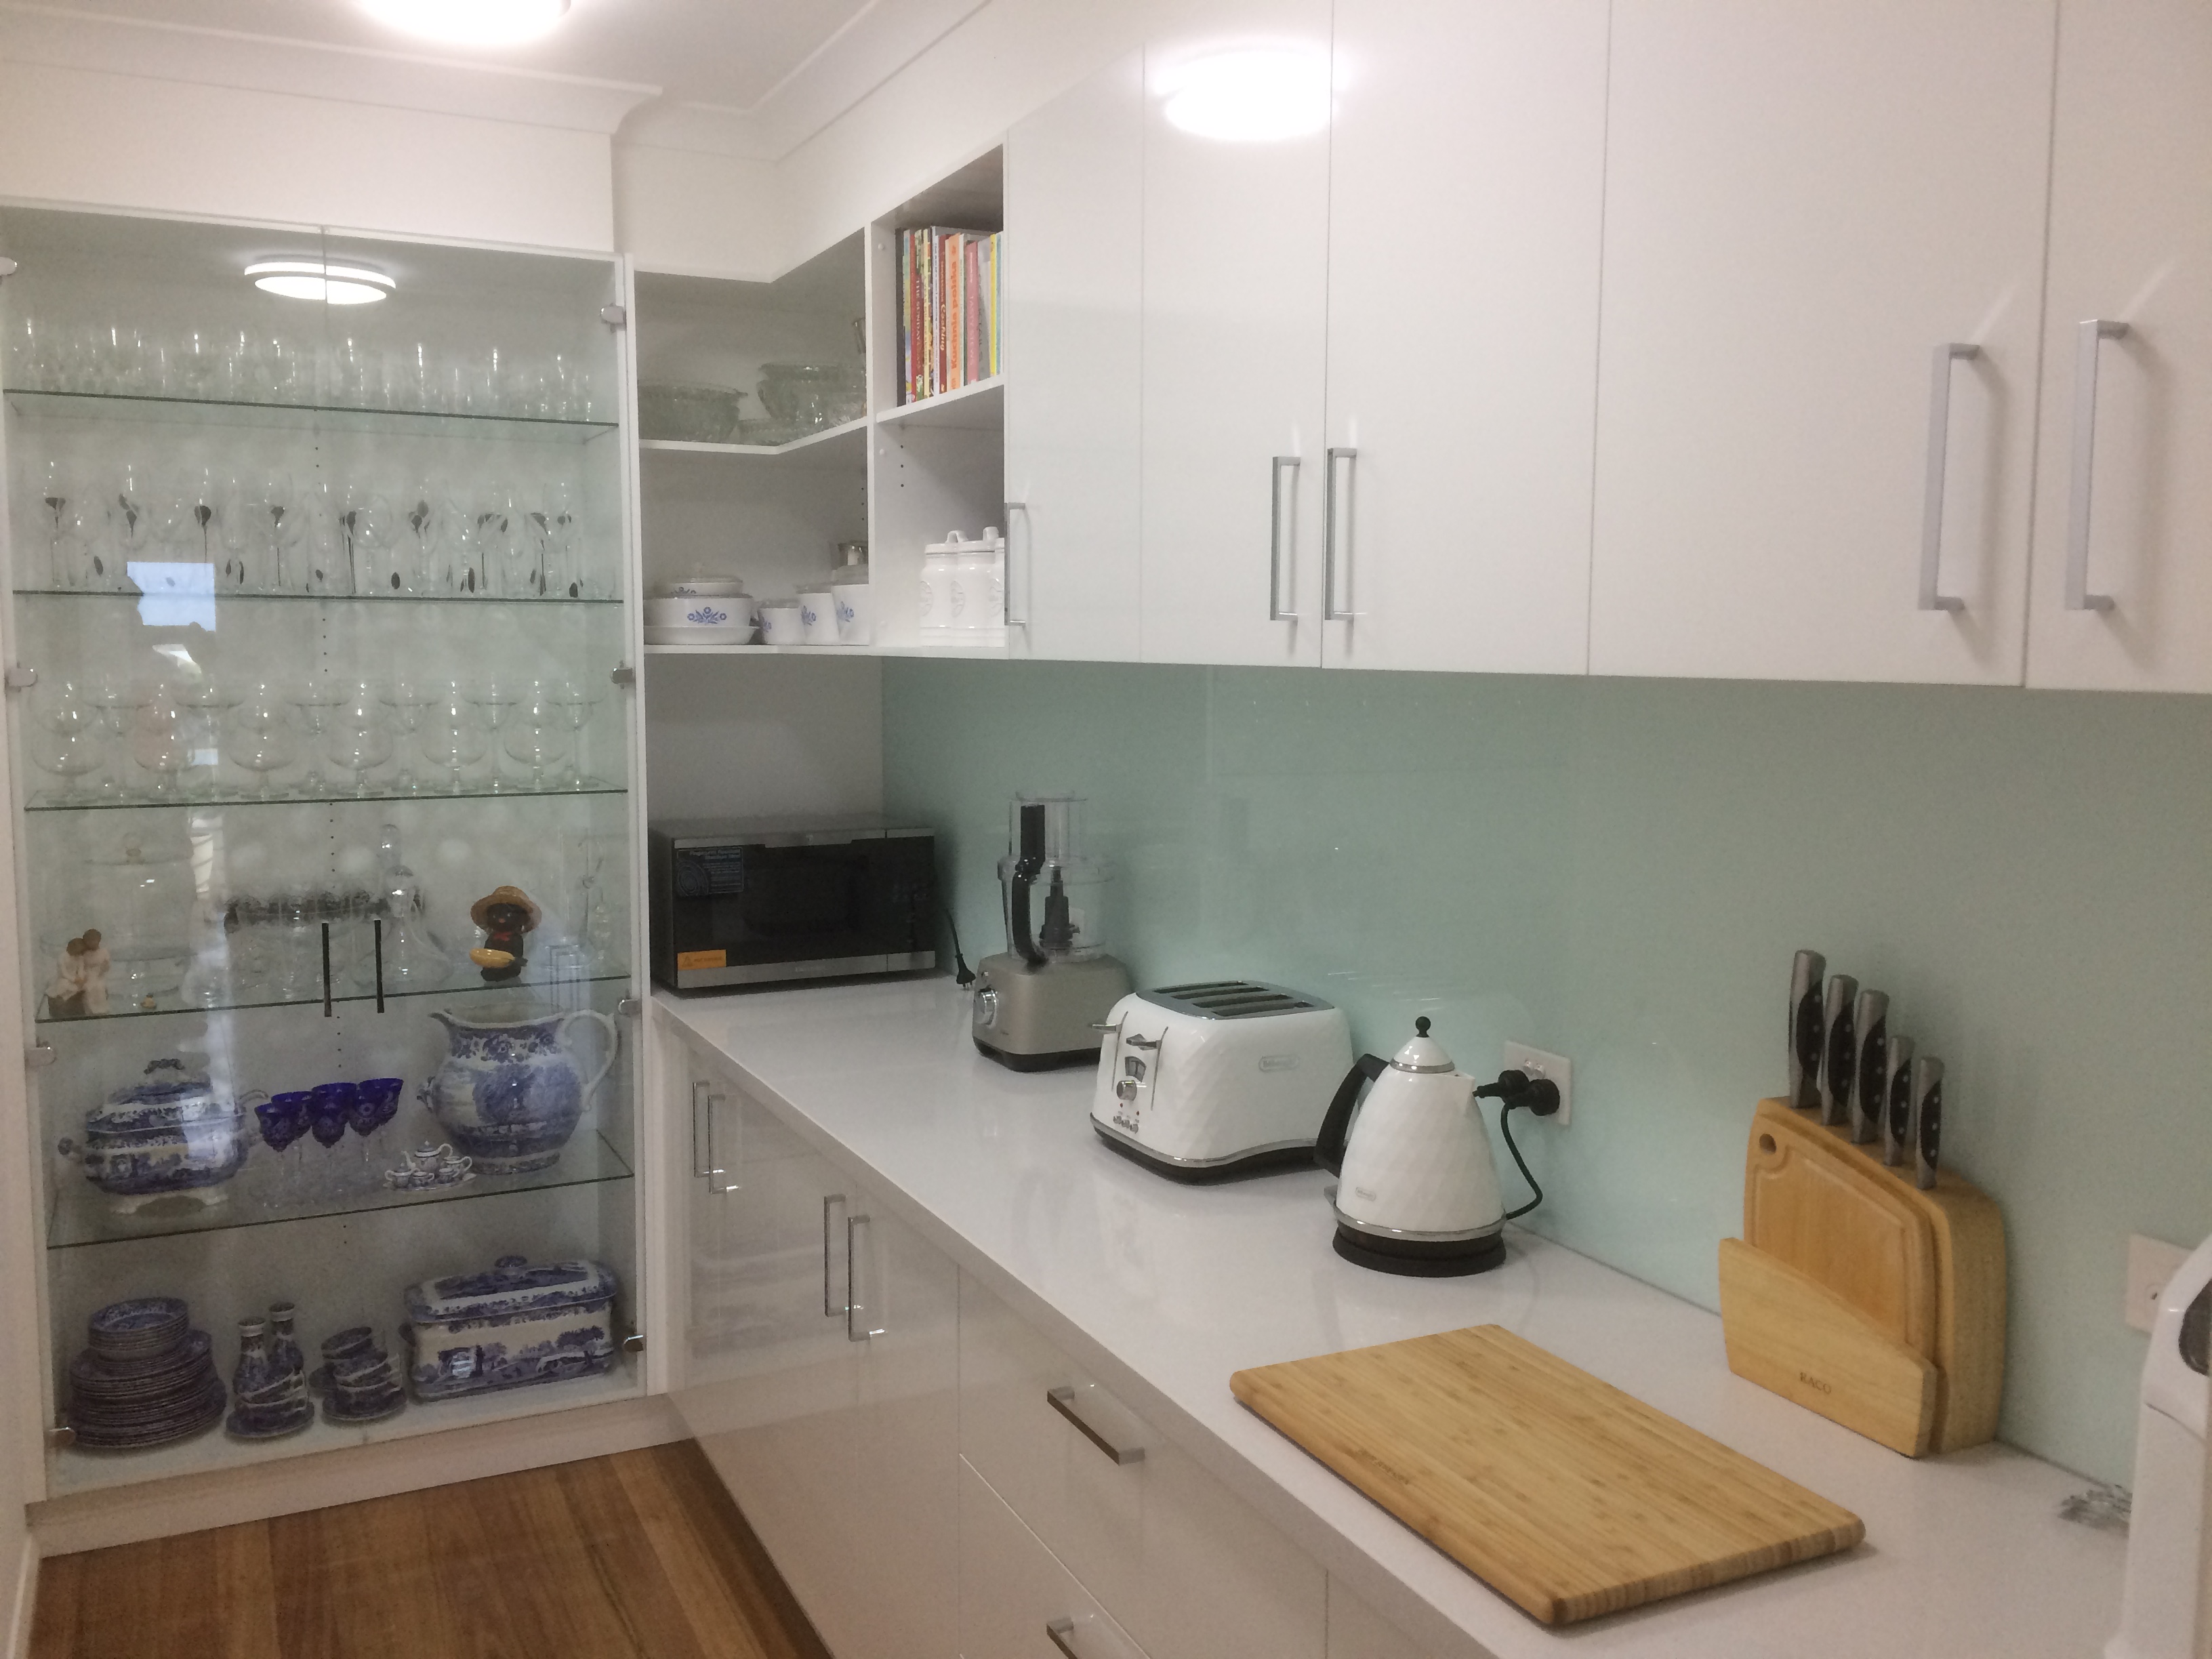 My New Cabinets North Geelong 0400 453 851